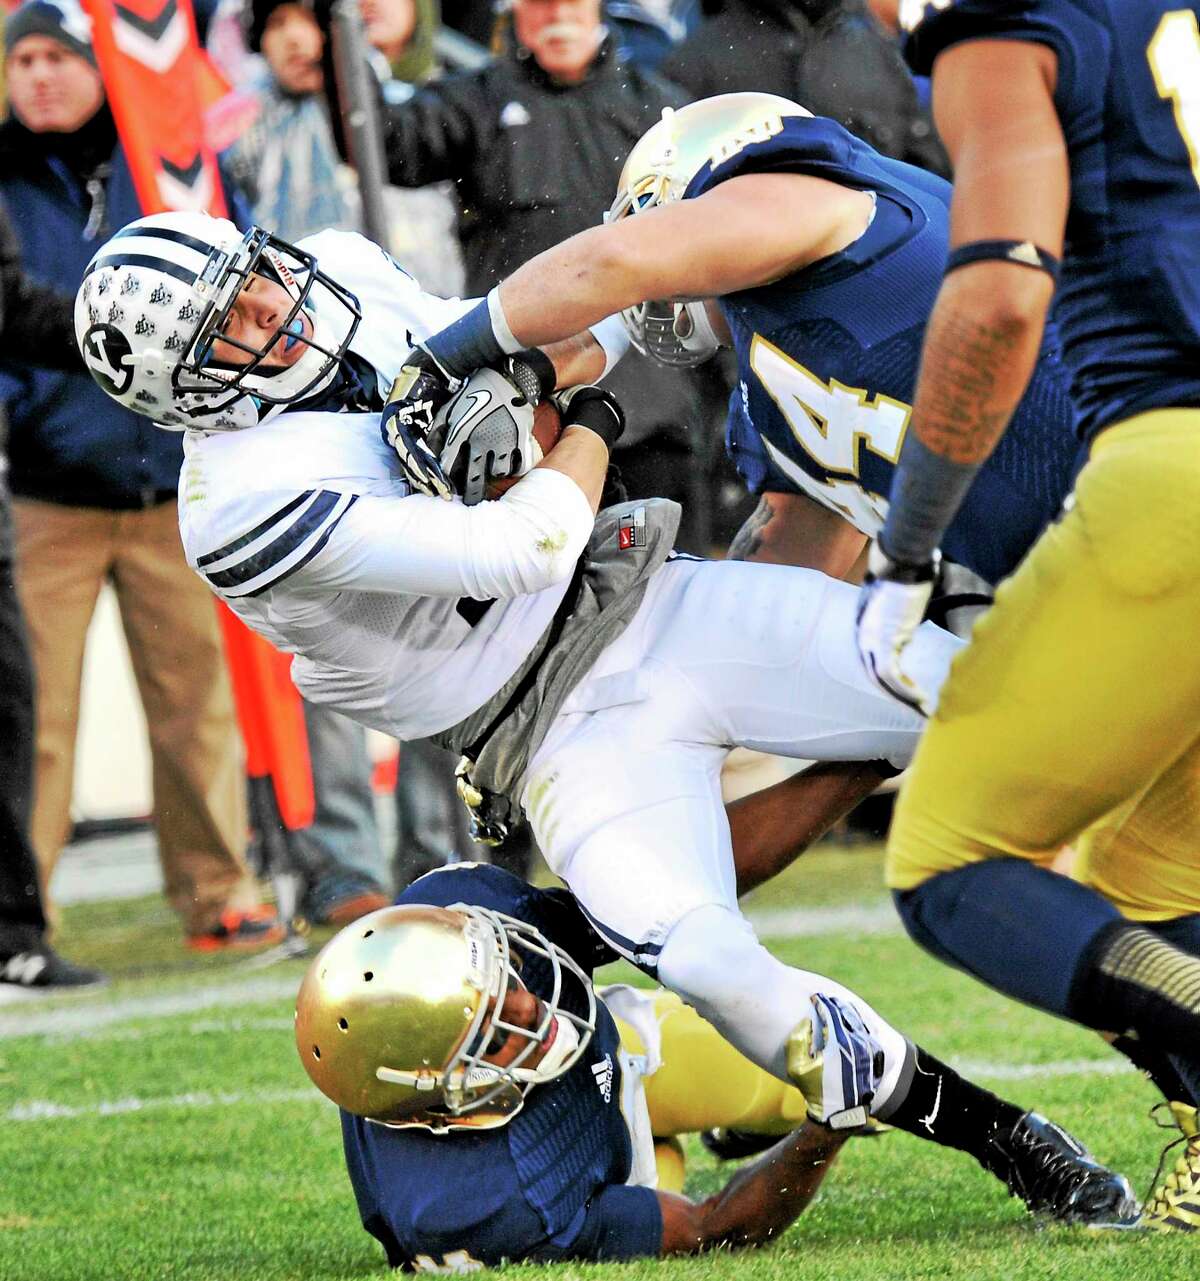 BYU wide receiver Skyley Ridley is tackled by Notre Dame linebacker Carlo Calabrese, right, and cornerback KaiVarae Russell during a Nov. 23, 2013, game in South Bend, Ind. Calabrese says new UConn football coach Bob Diaco will bring a winning culture to the Huskies.